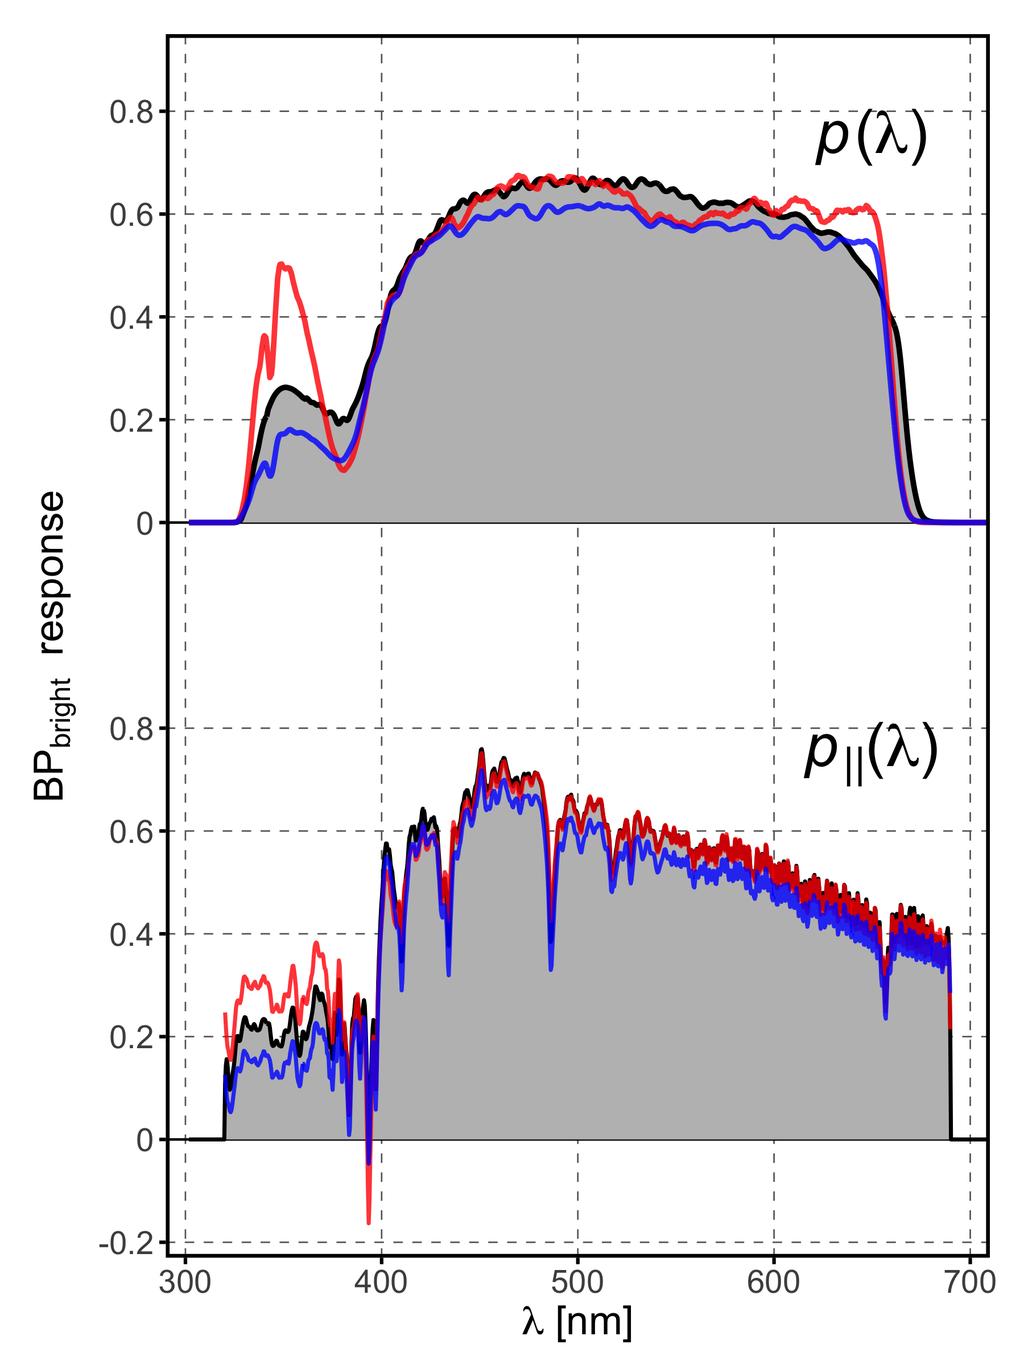 M. Weiler: Revised Gaia Data Release 2 passbands Fig. 5. Residuals for the BP passband for four spectral libraries. Left panel: Evans et al. (2018), REV passband. Right panel: This work.